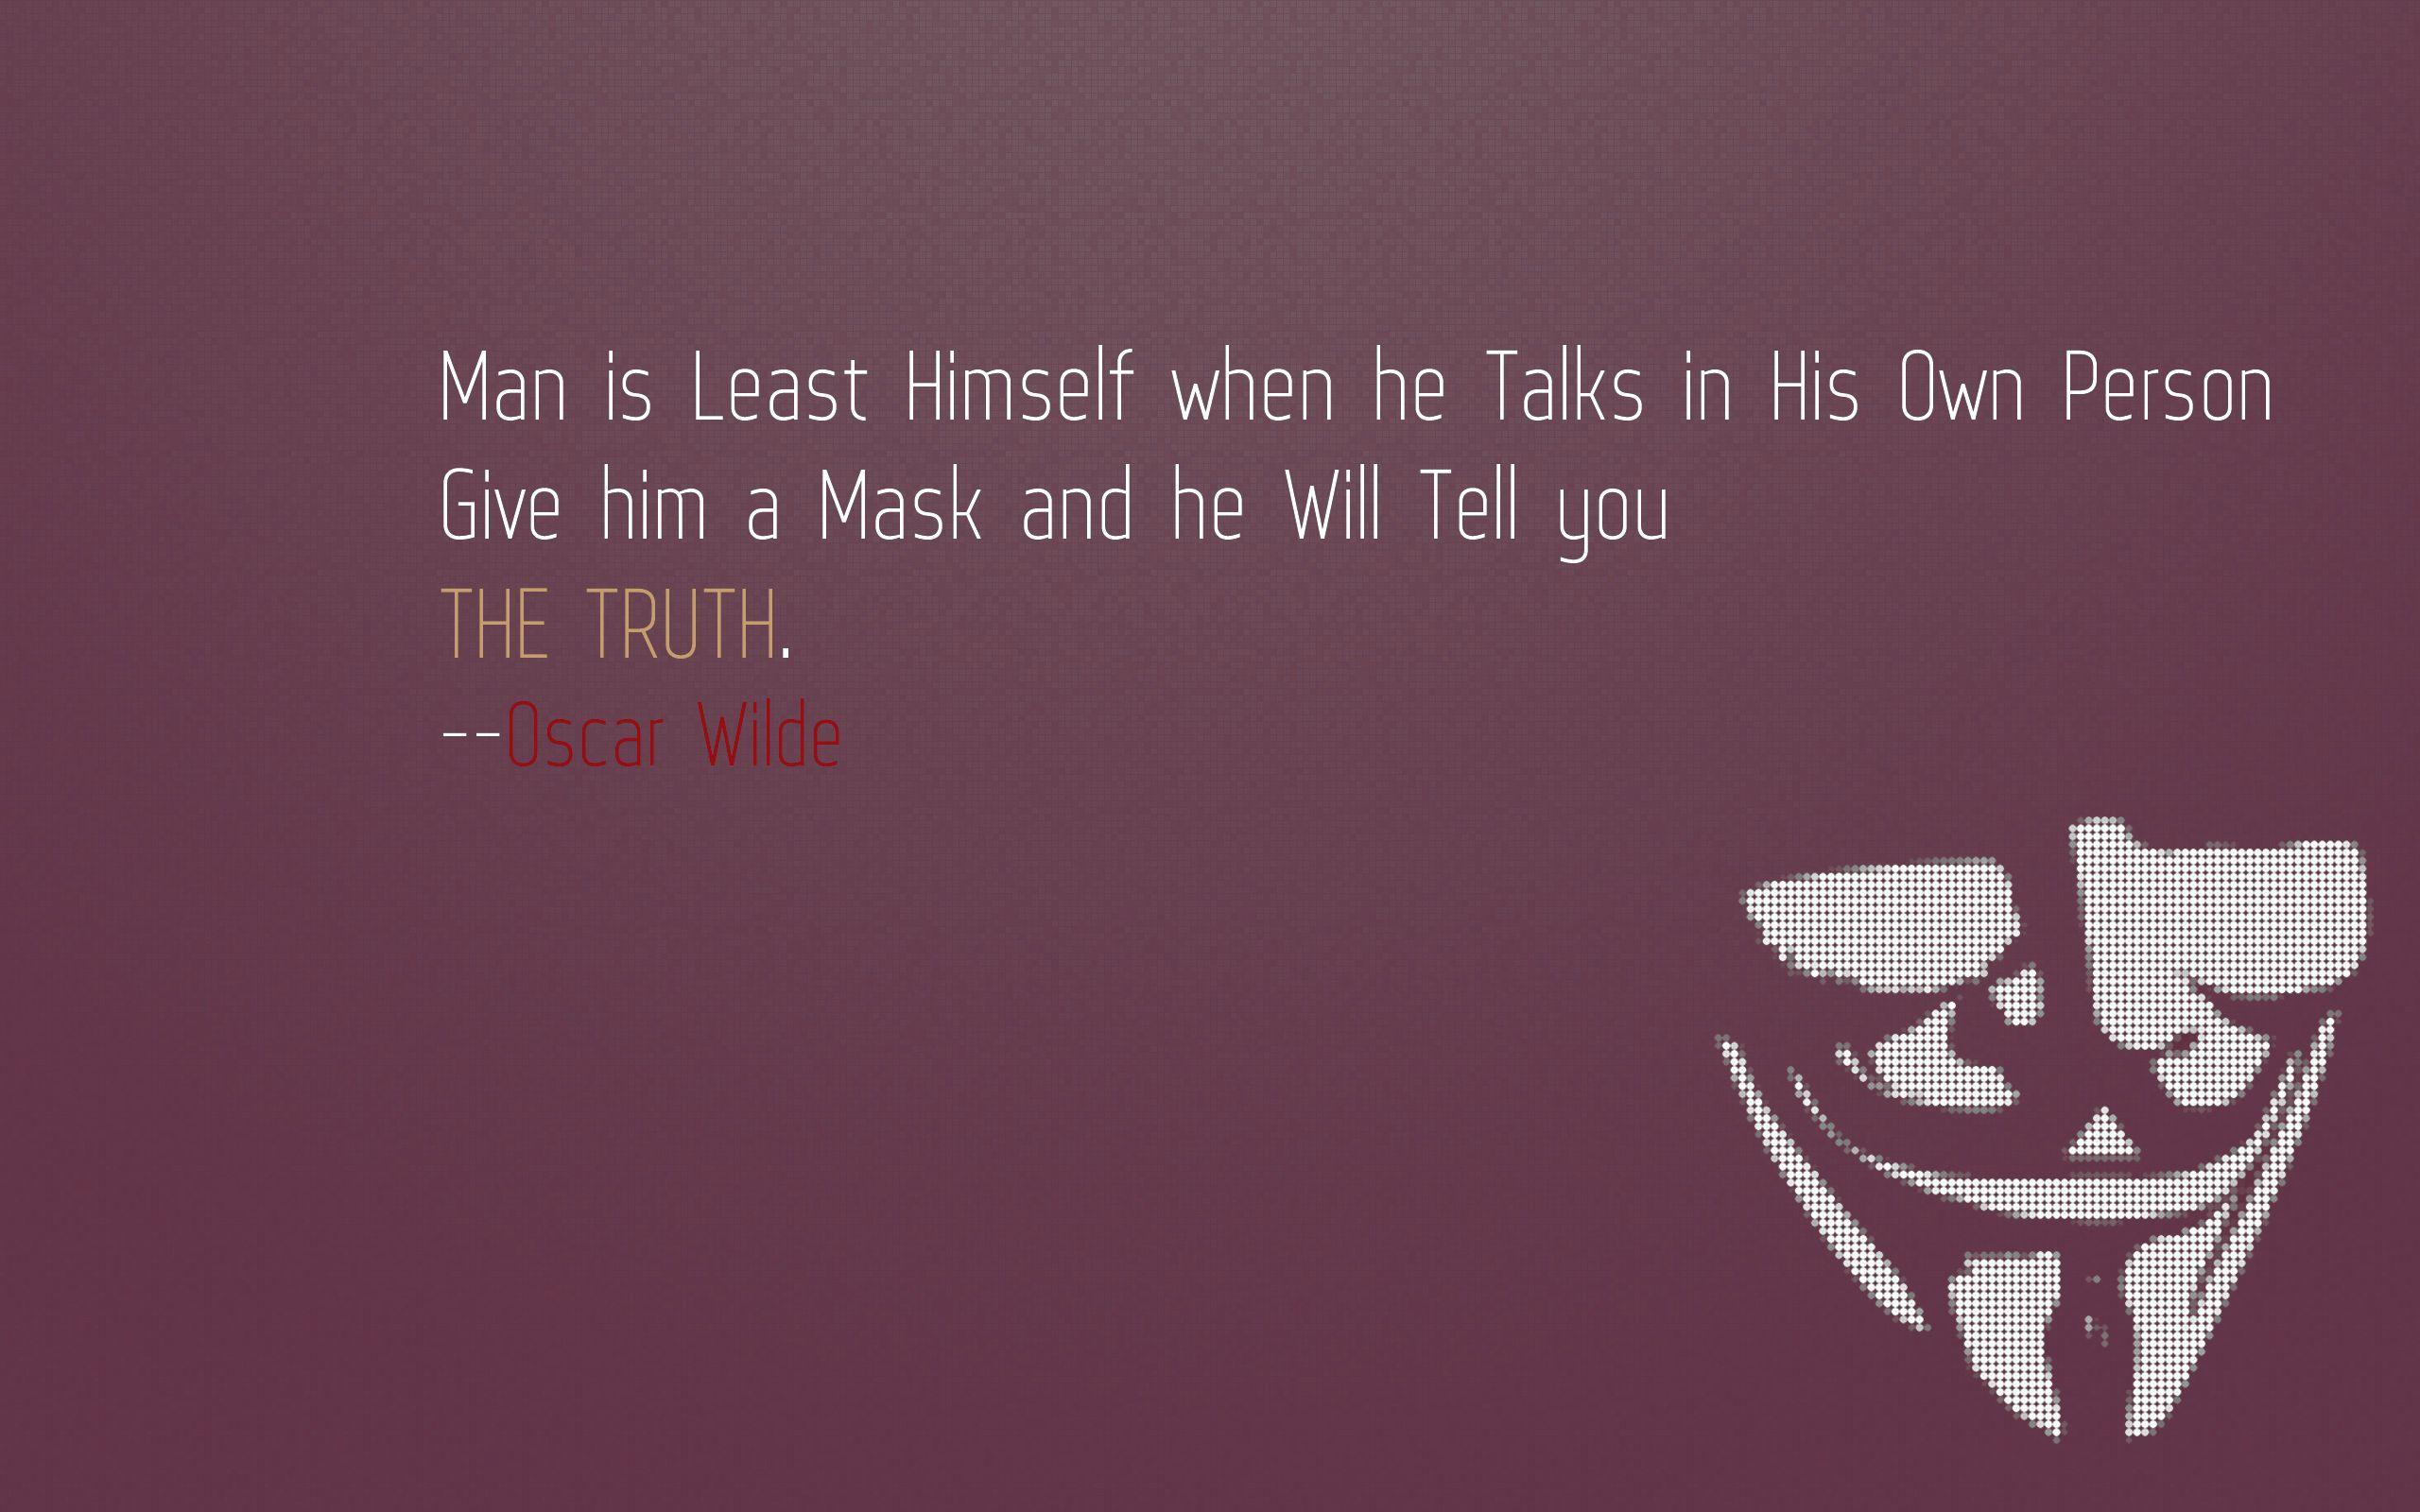 Give mask and tell truth